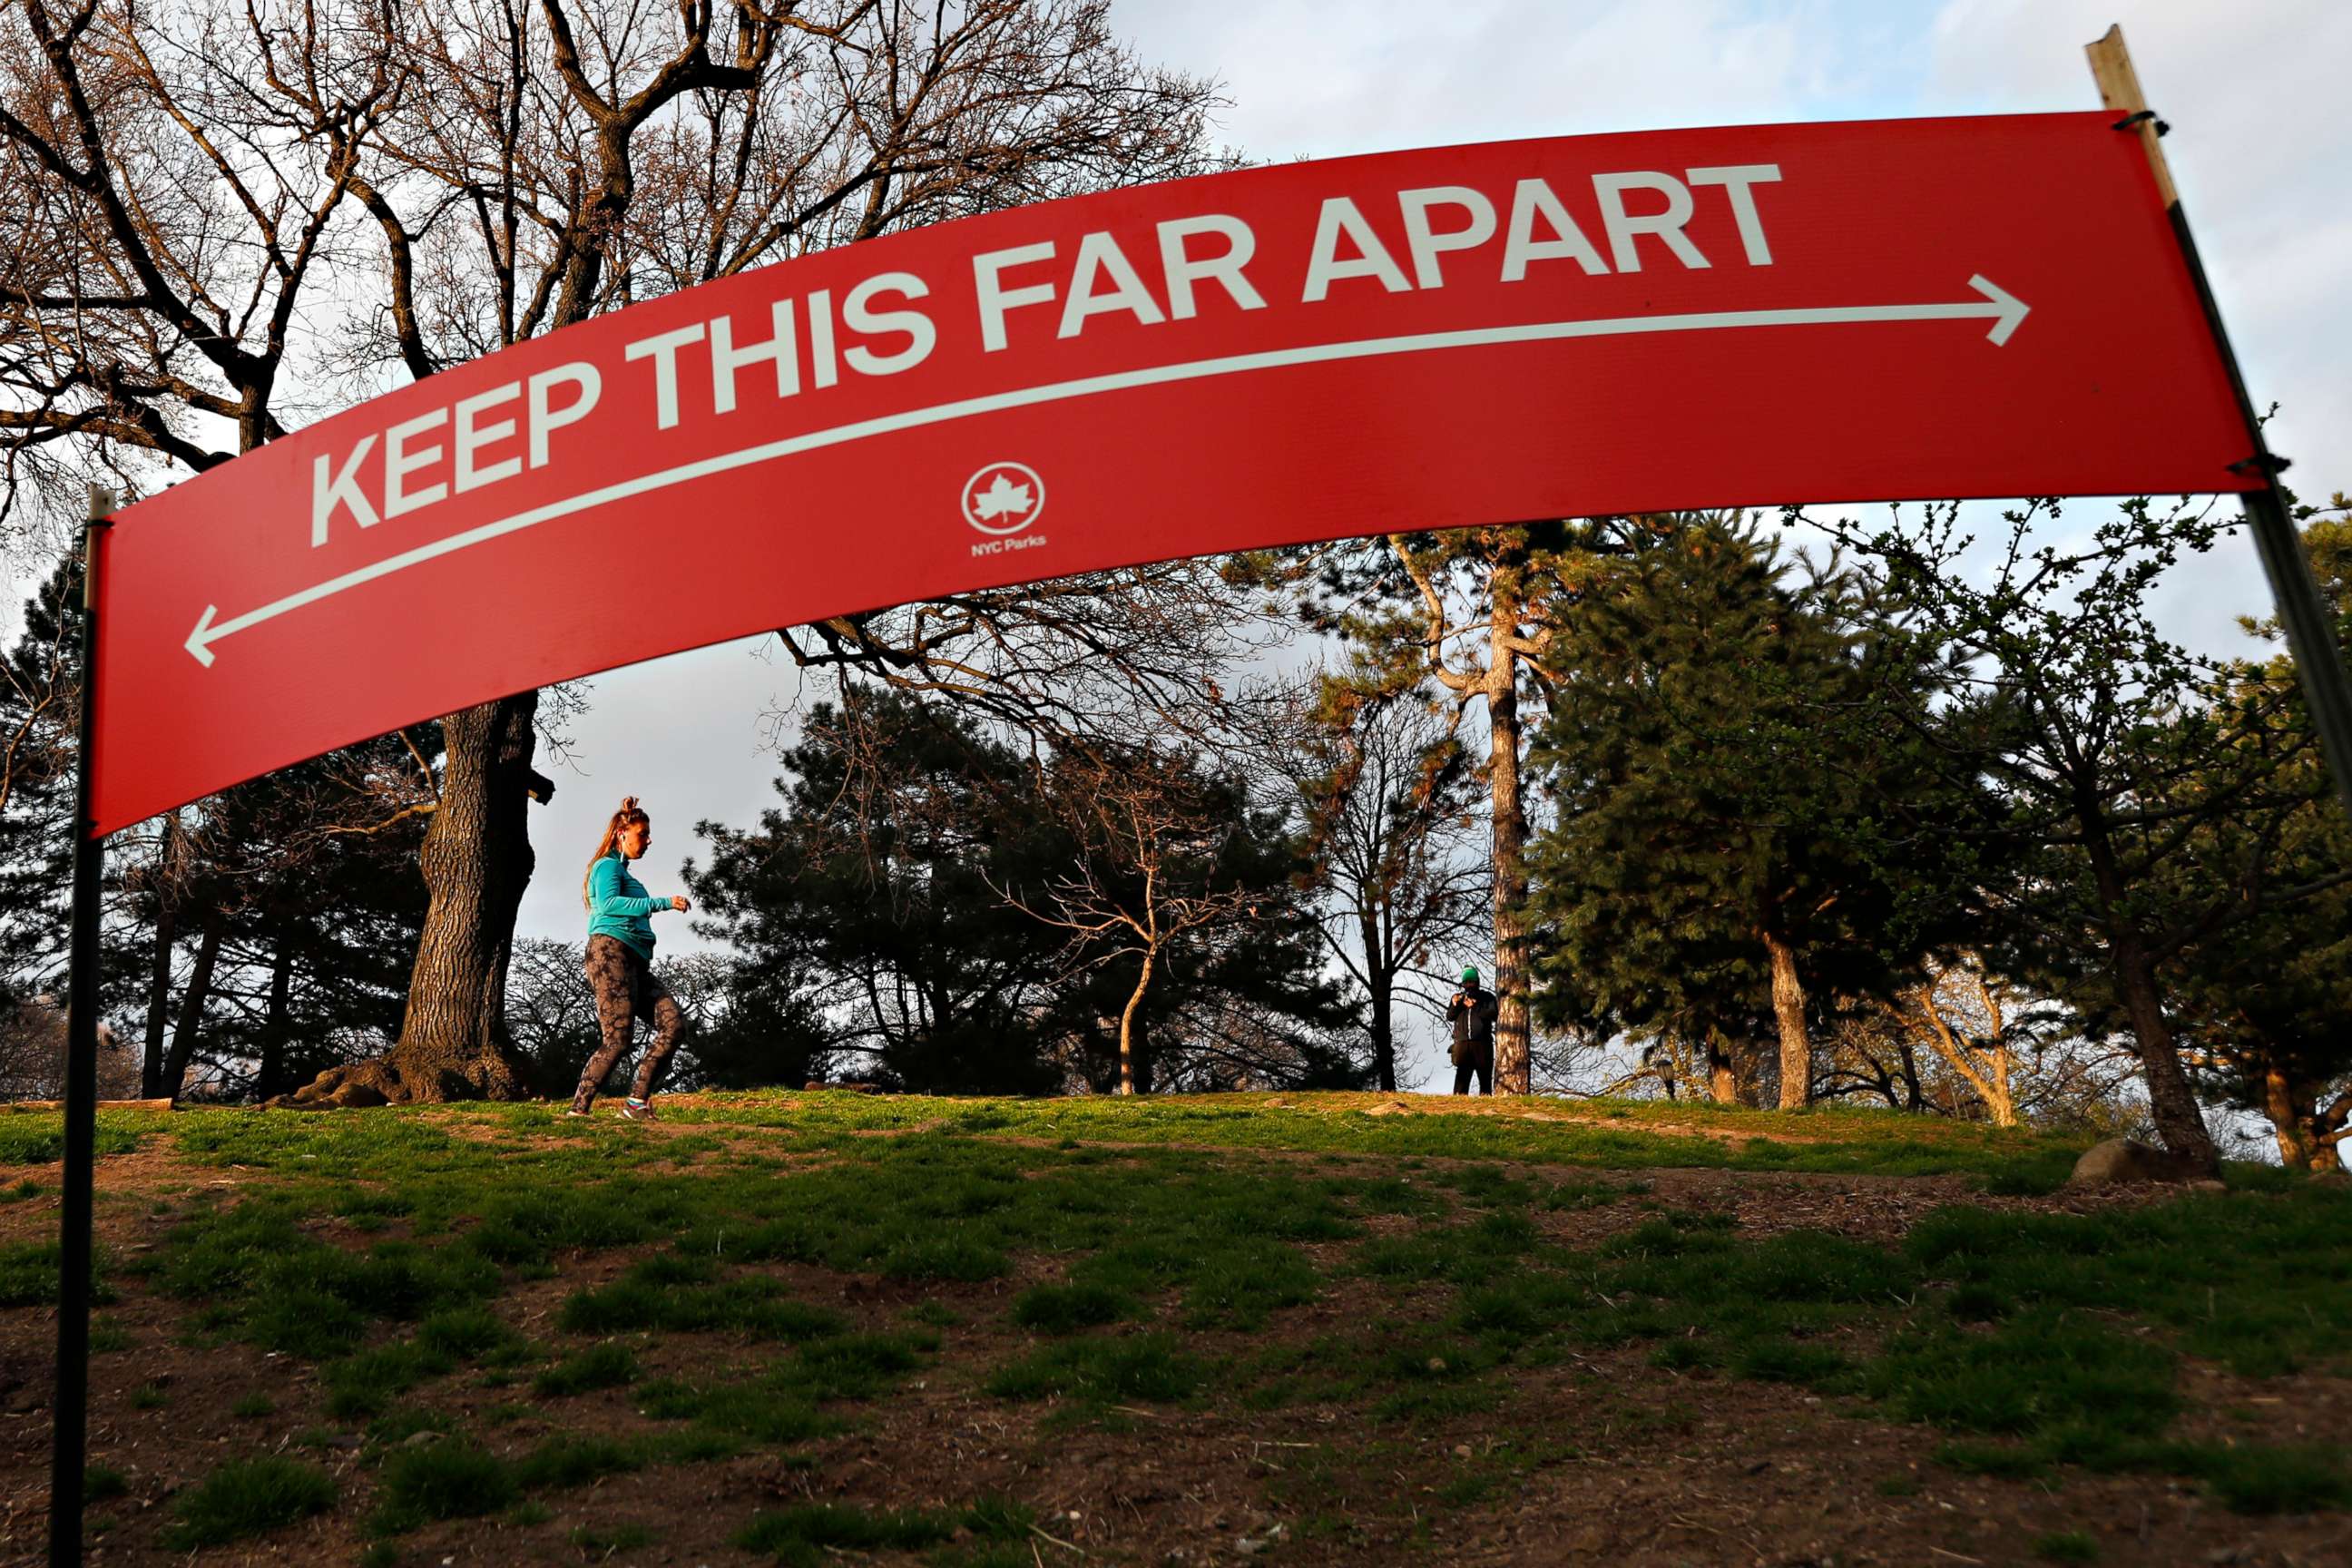 PHOTO: A woman jogs in Brooklyn's Fort Greeene park, April 5, 2020, beneath a sign demonstrating the distance people should keep from each other during the coronavirus outbreak in New York.